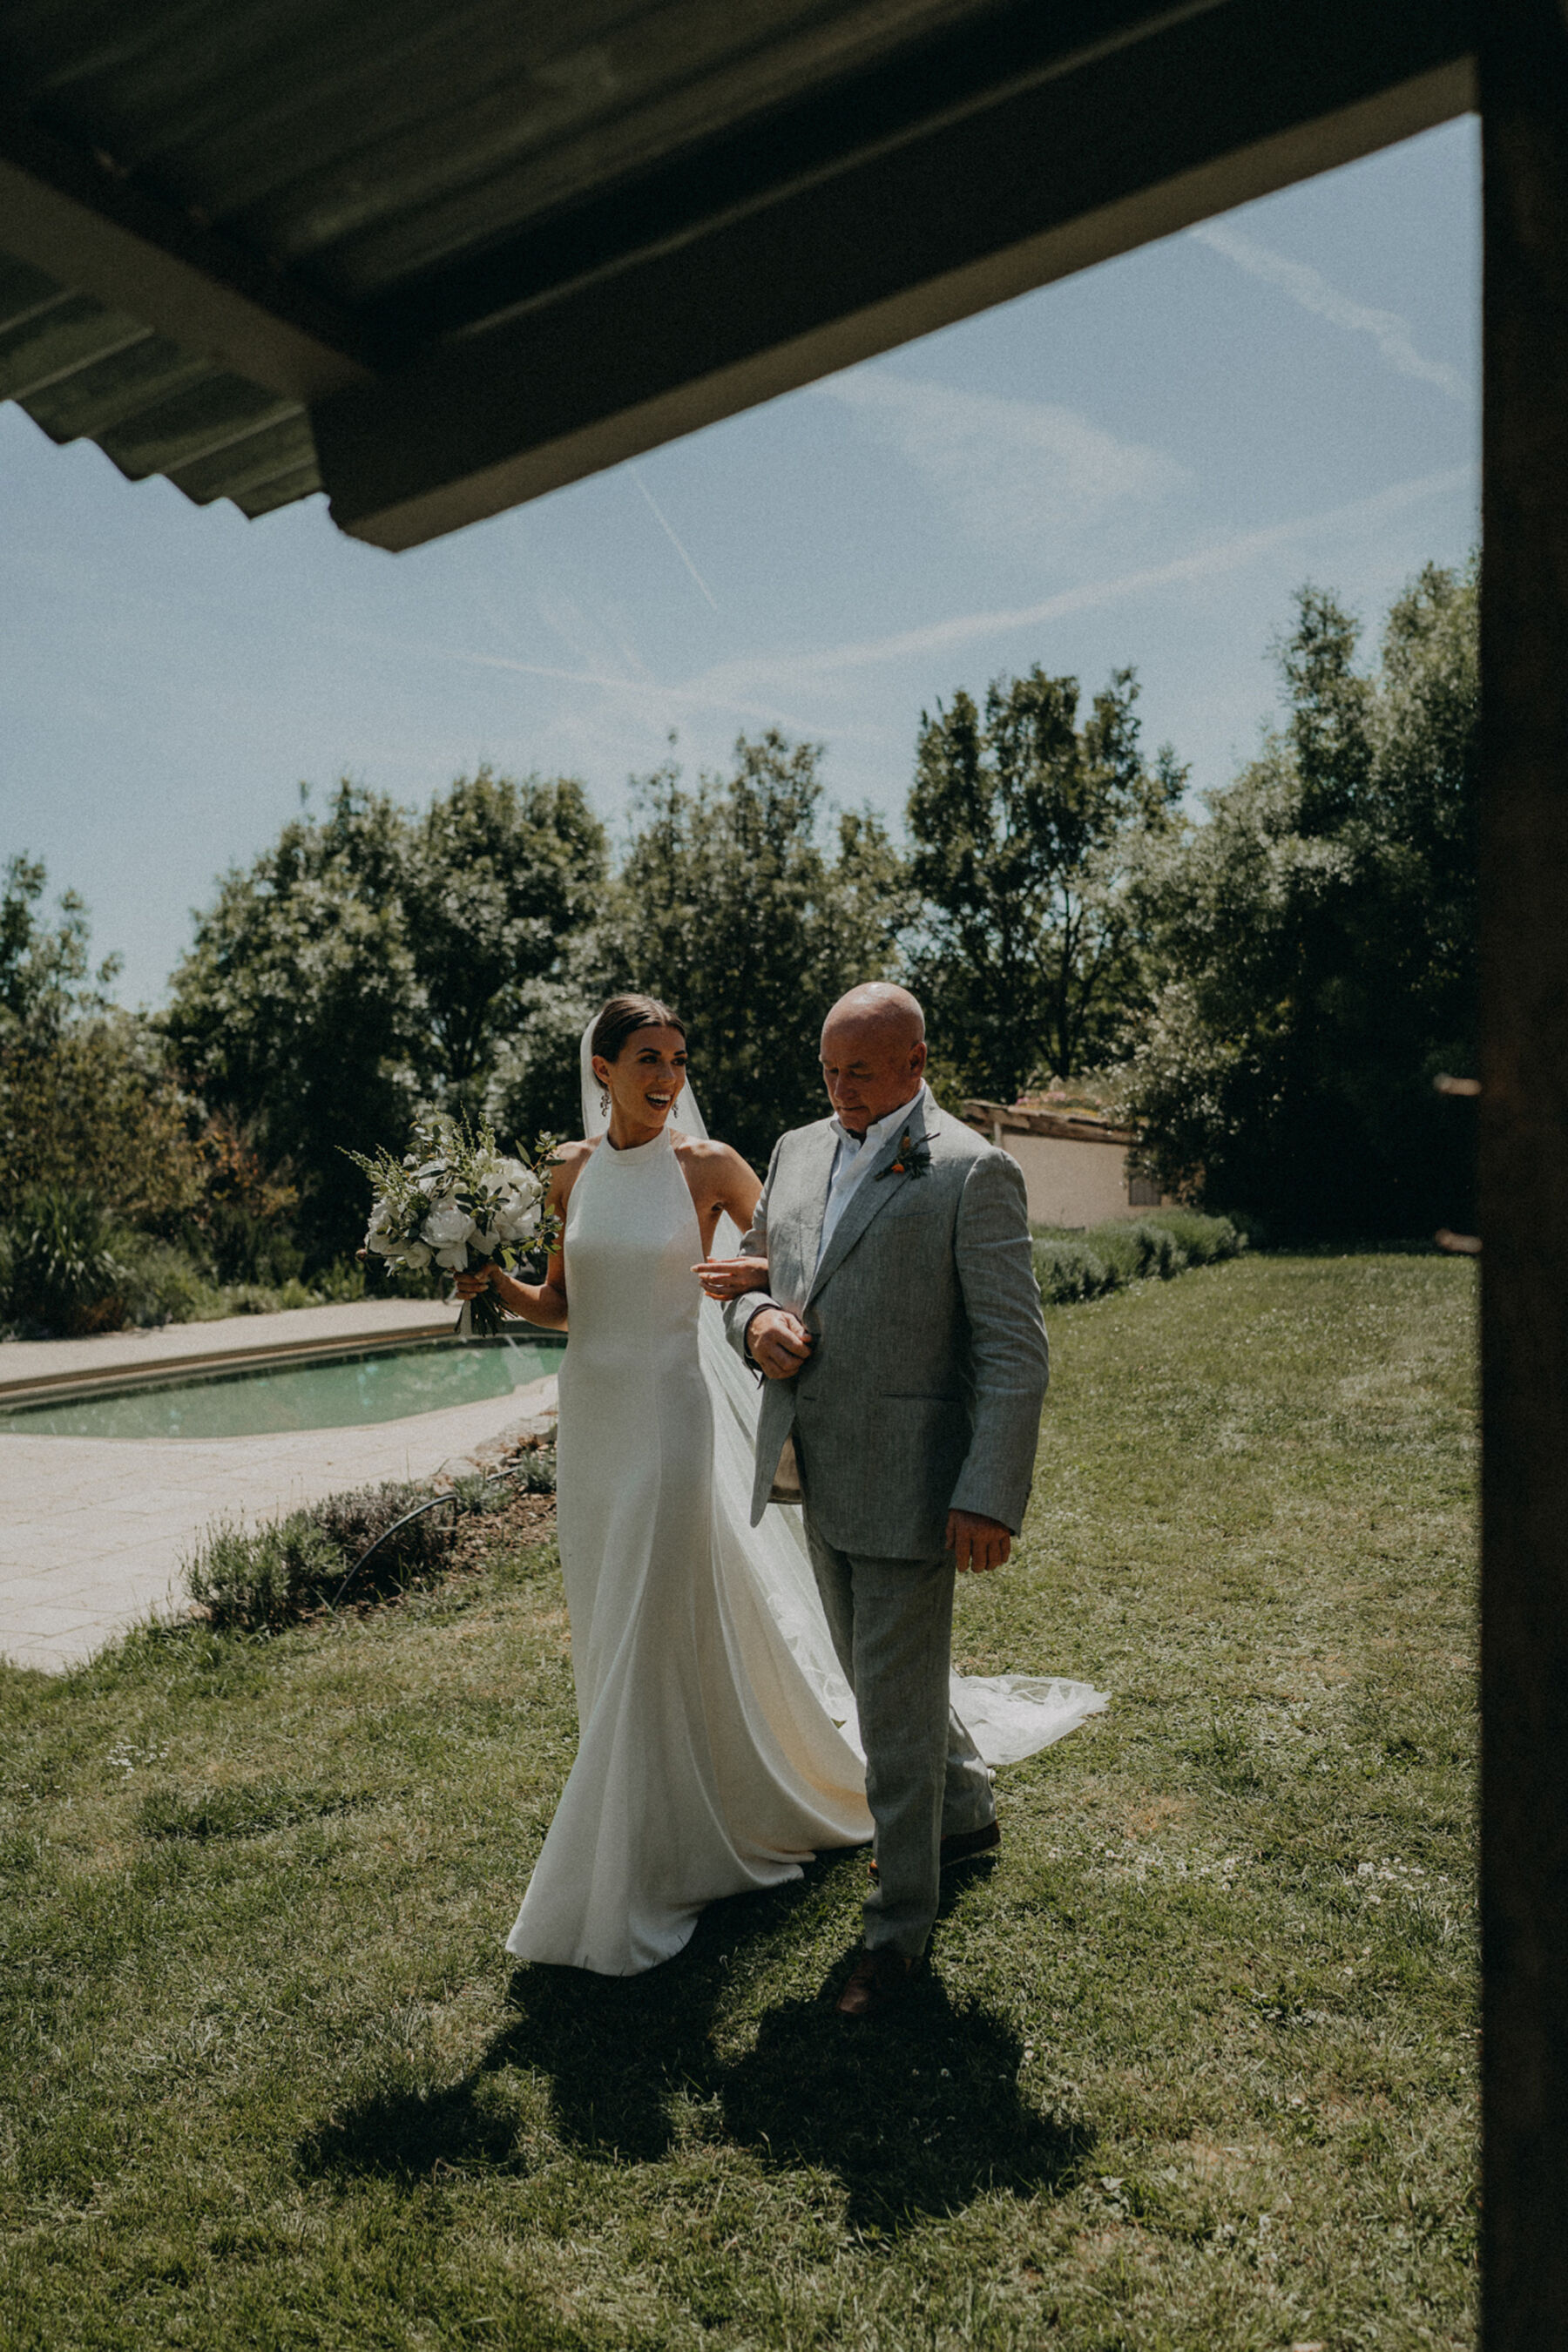 Bride in a halterneck wedding dress with her father walking to the ceremony.